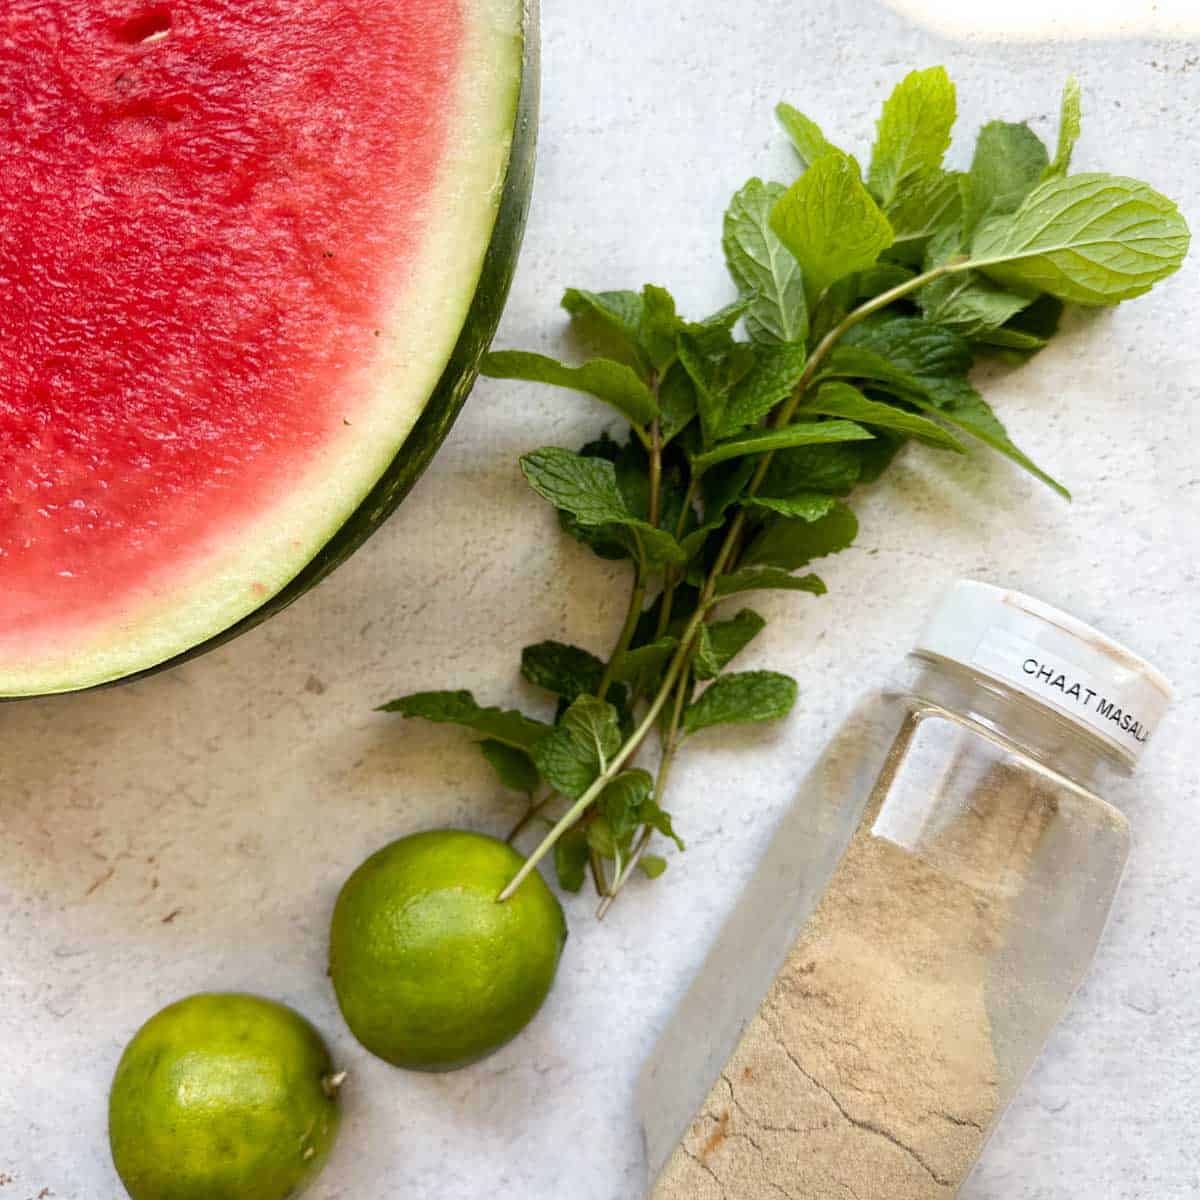 Ingredients for Indian watermelon drink with chaat masala, limes, mint, and watermelon.